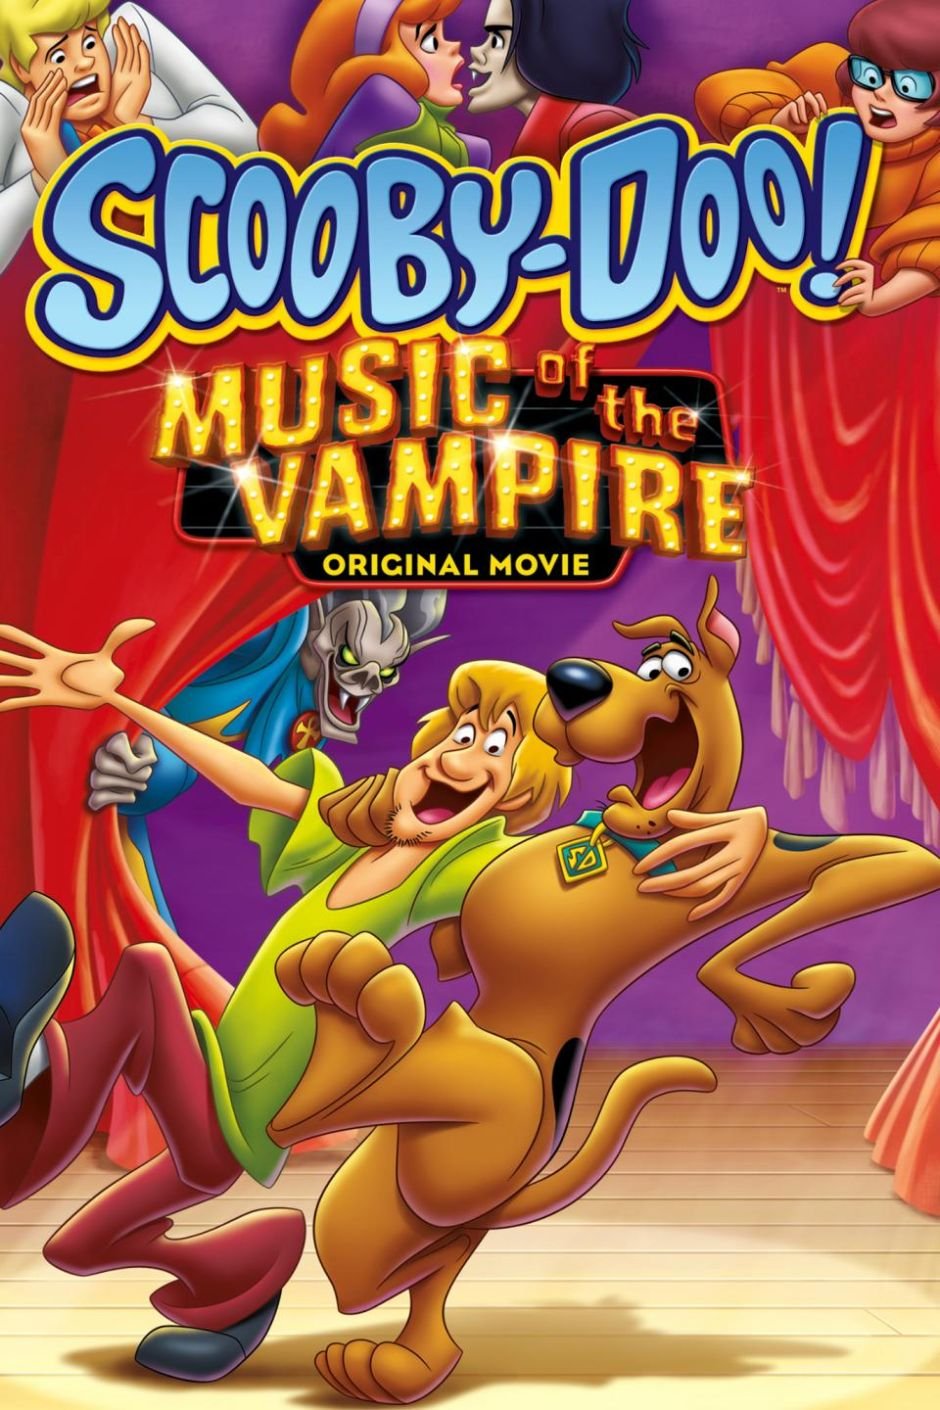 Poster of the movie Scooby-Doo! Music of the Vampire